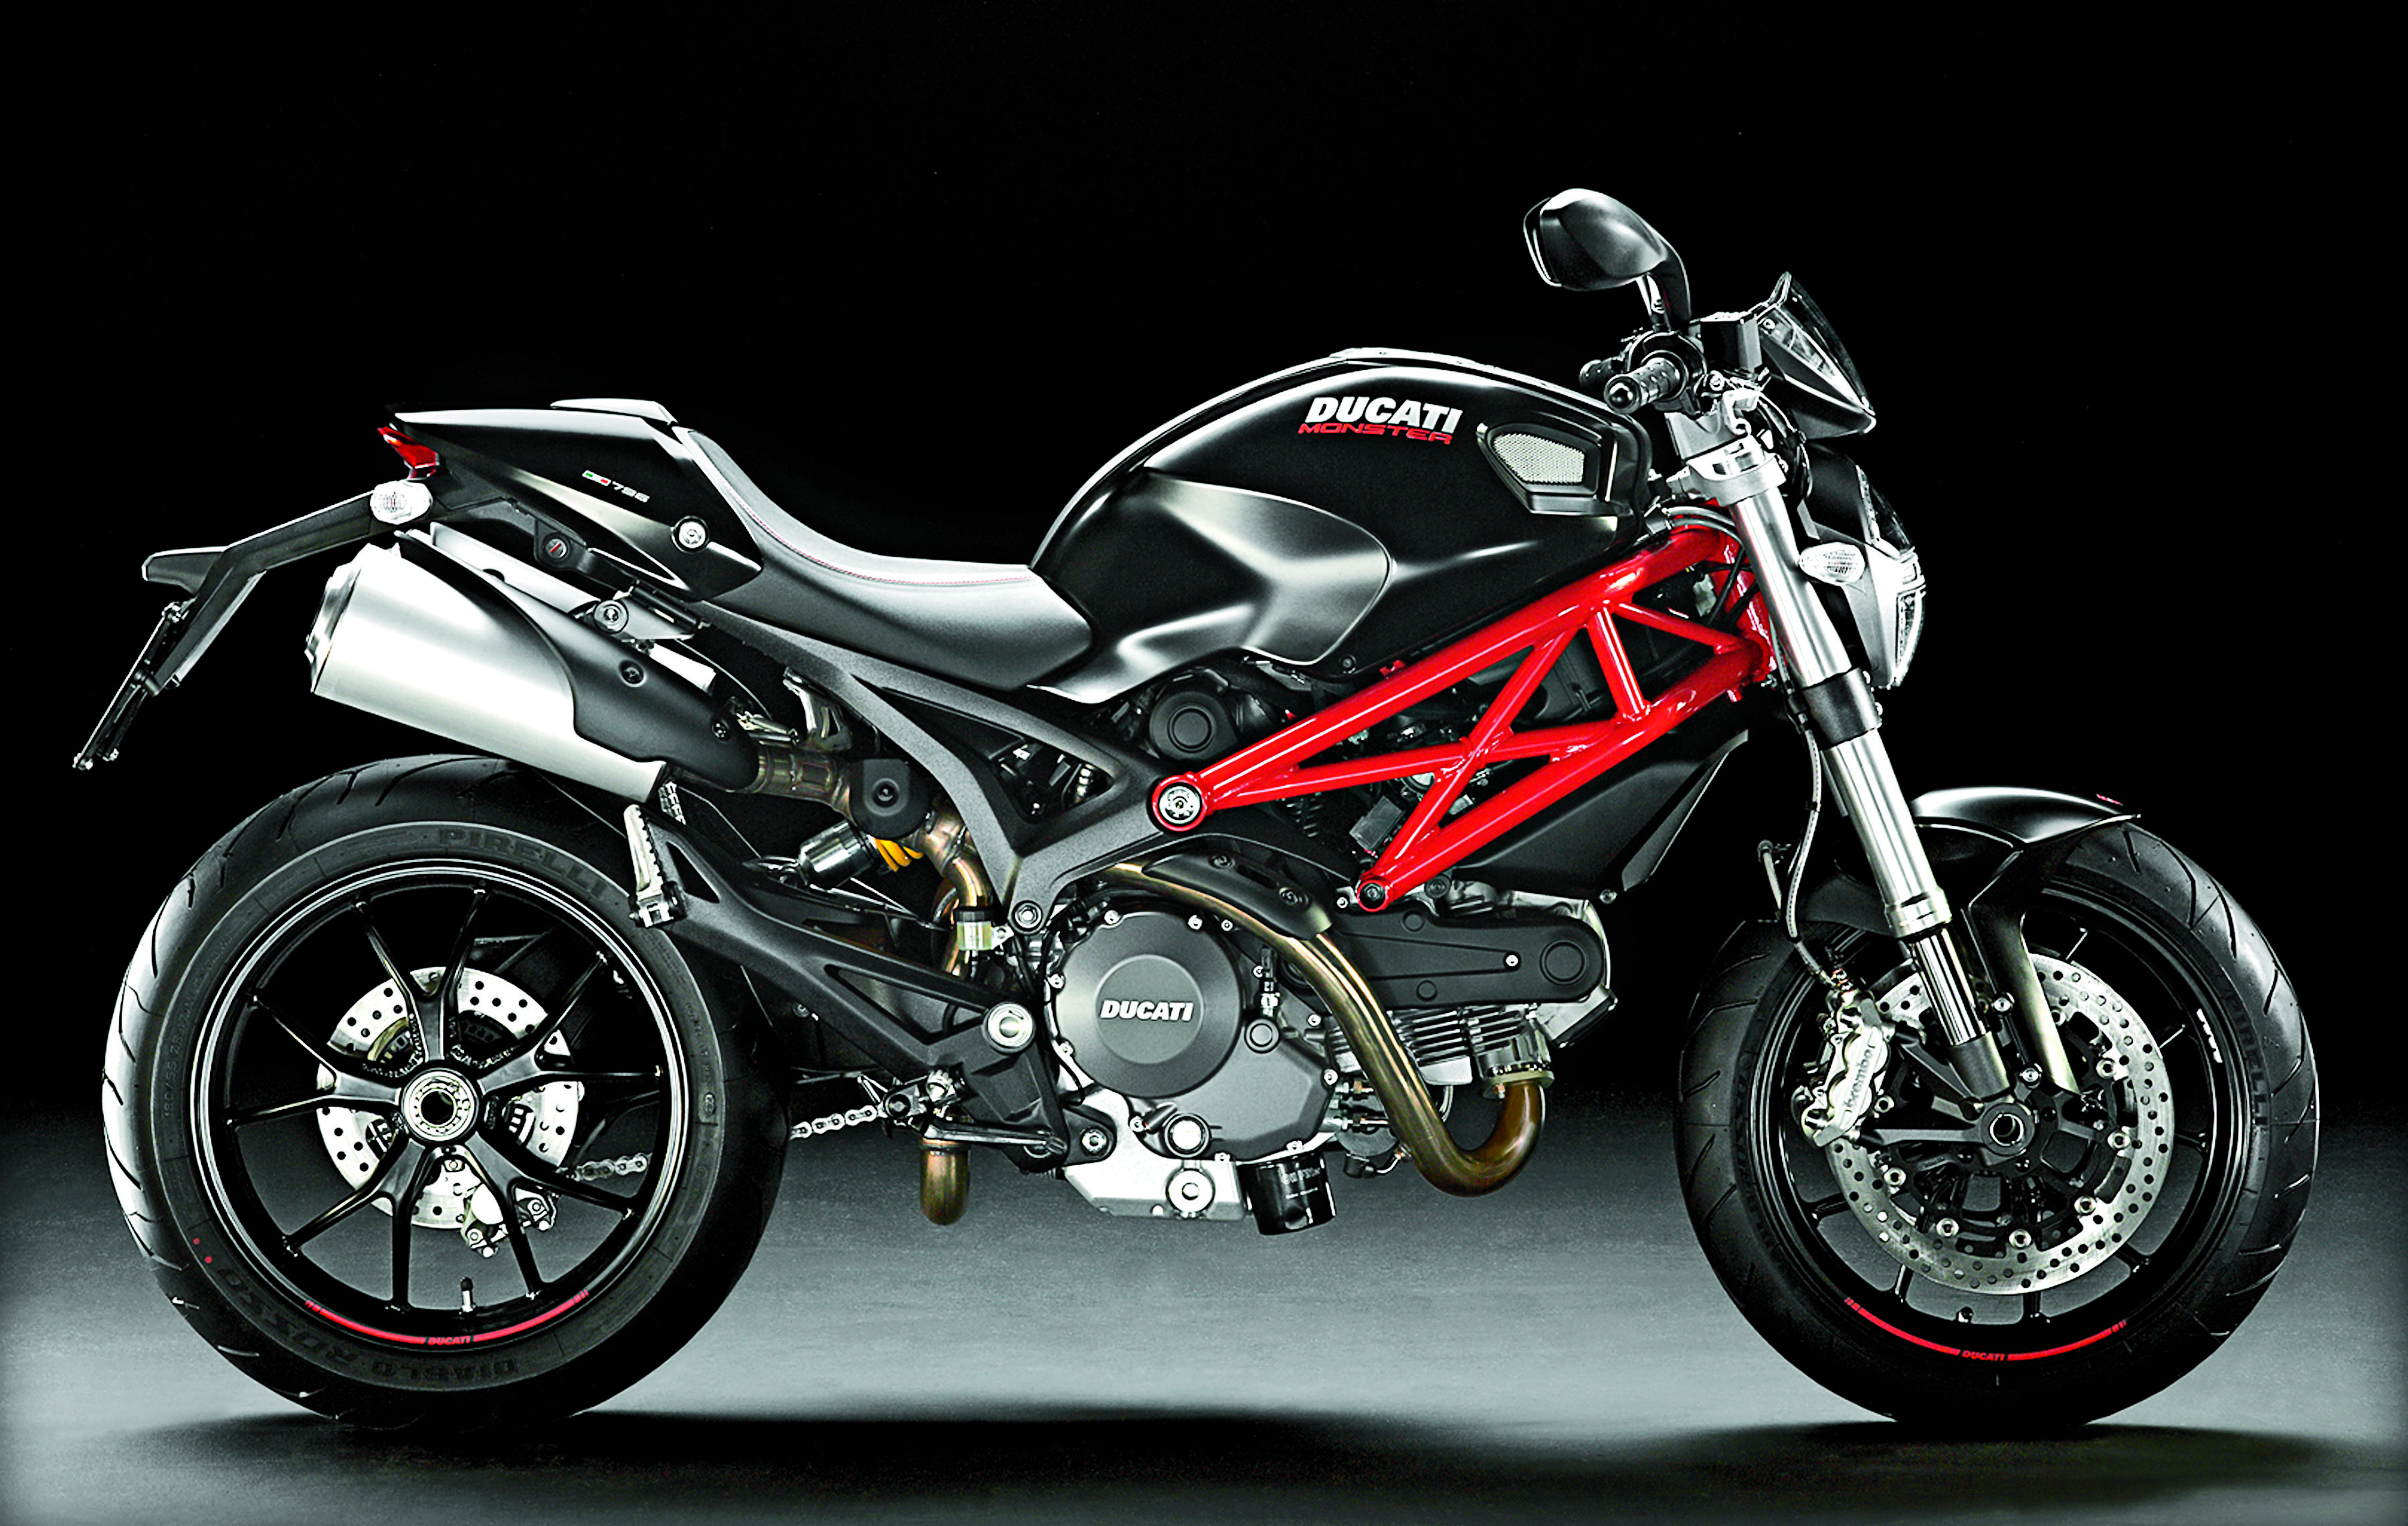 Madison pave semester Ducati Monster 796 Naked Bike Best Used Motorcycles | Cycle World